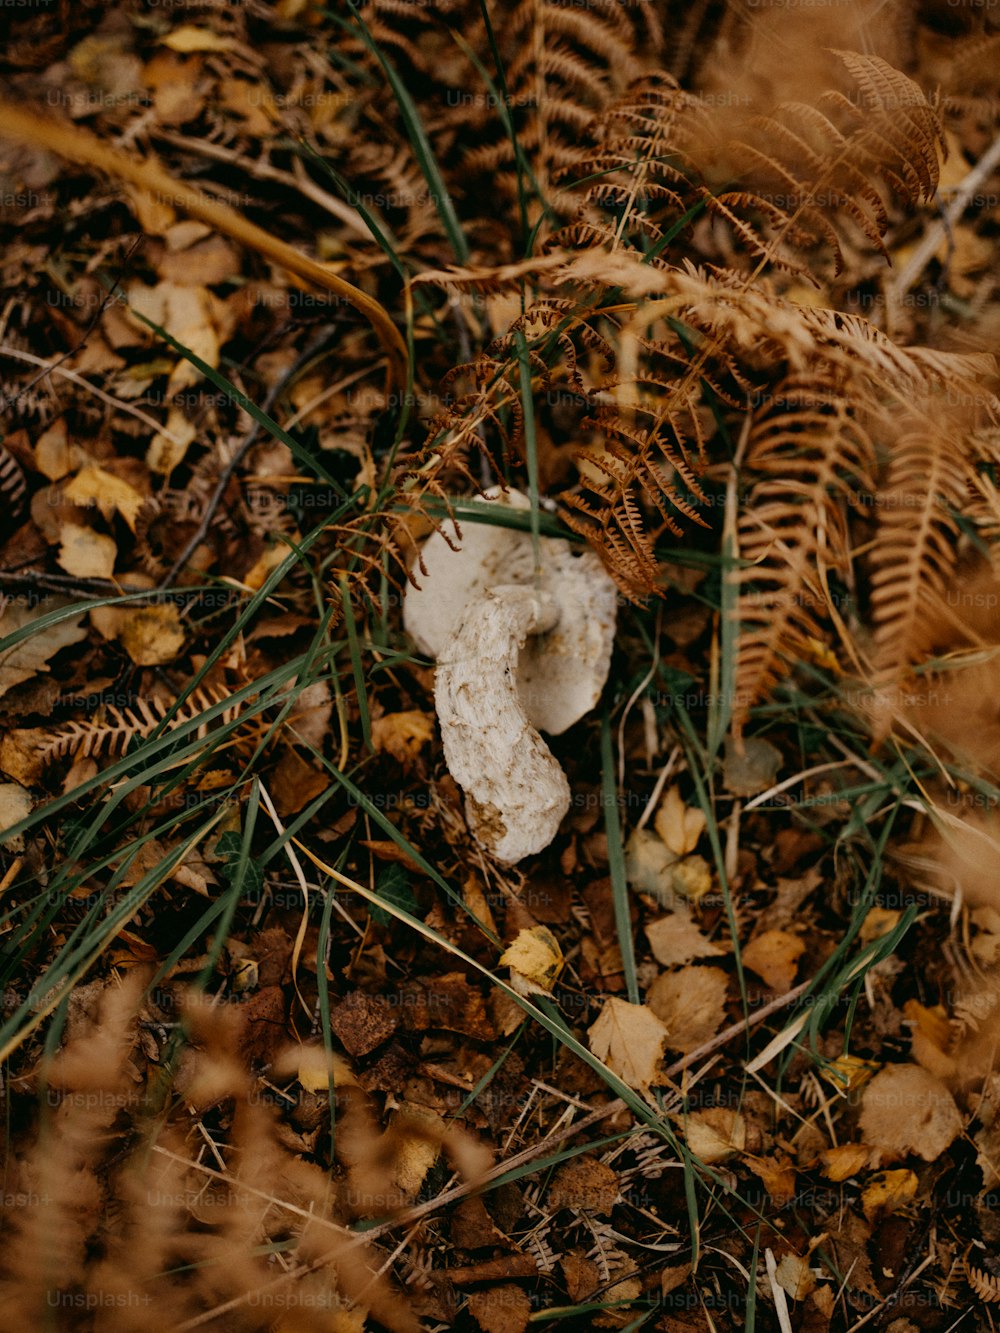 a mushroom sitting on the ground surrounded by leaves